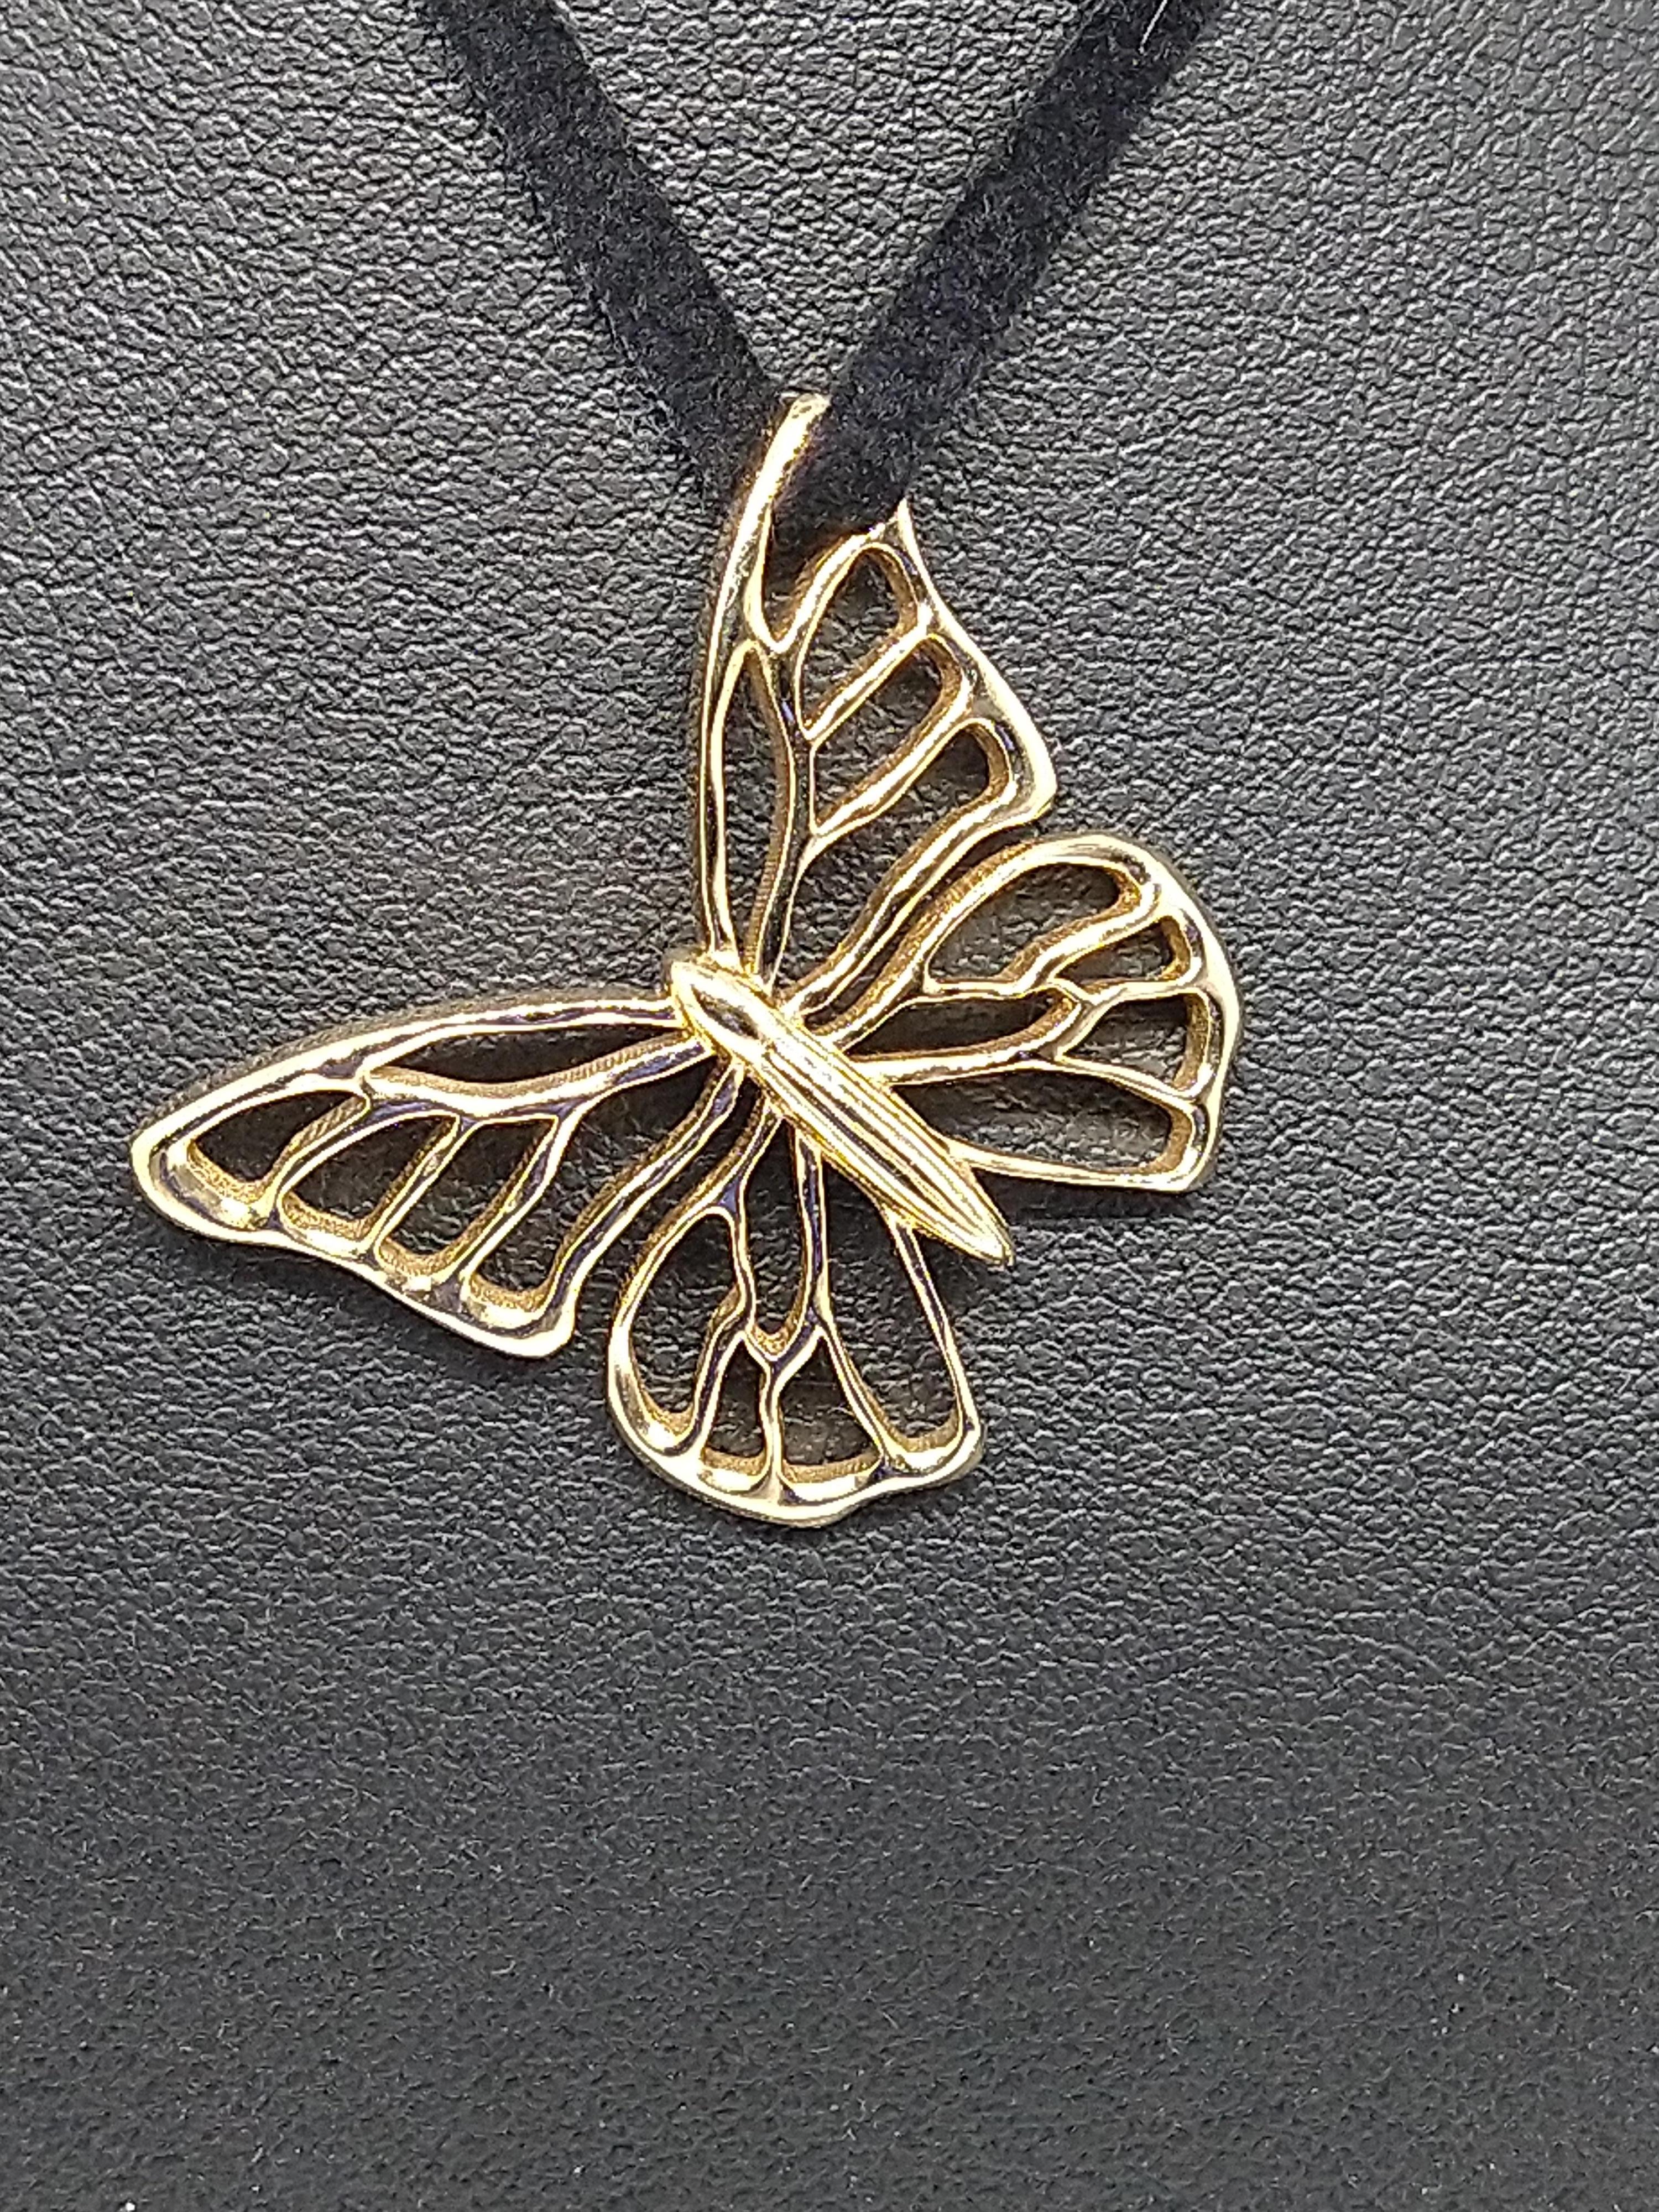 Contemporary 14 Karat Yellow Gold Butterfly Necklace on Suede For Sale